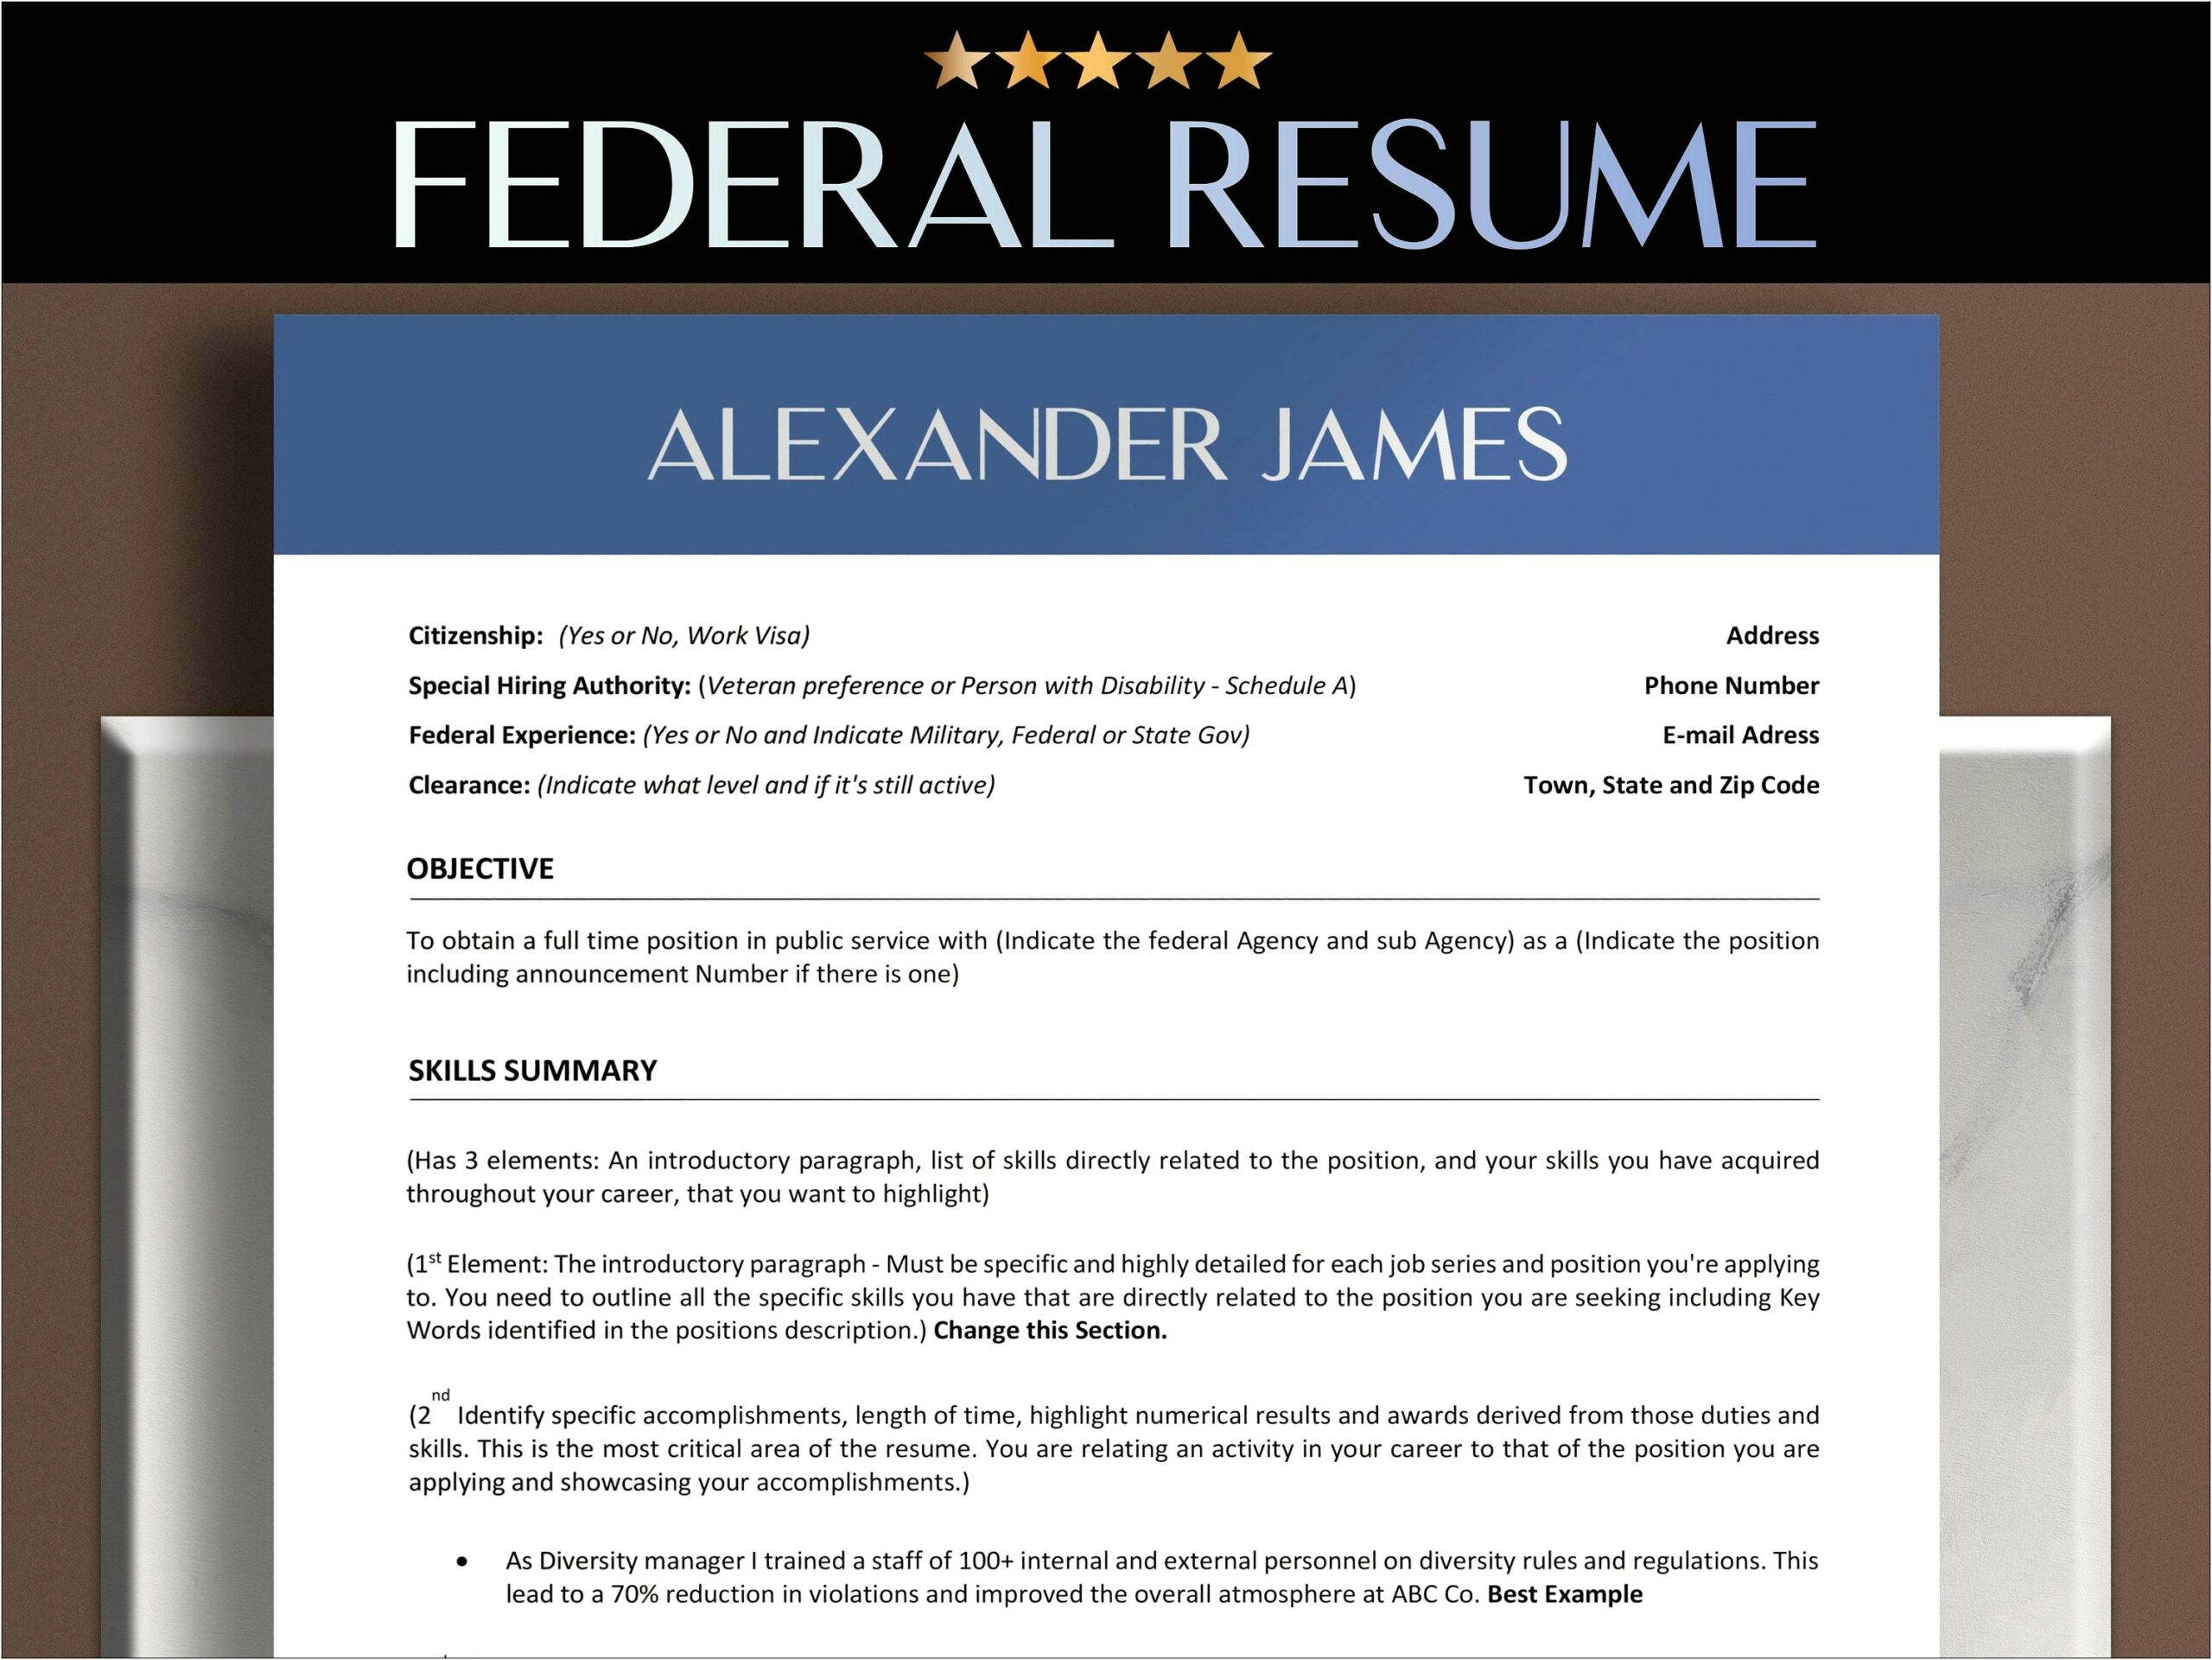 Federal Resume Duties Accomplishments And Related Skills